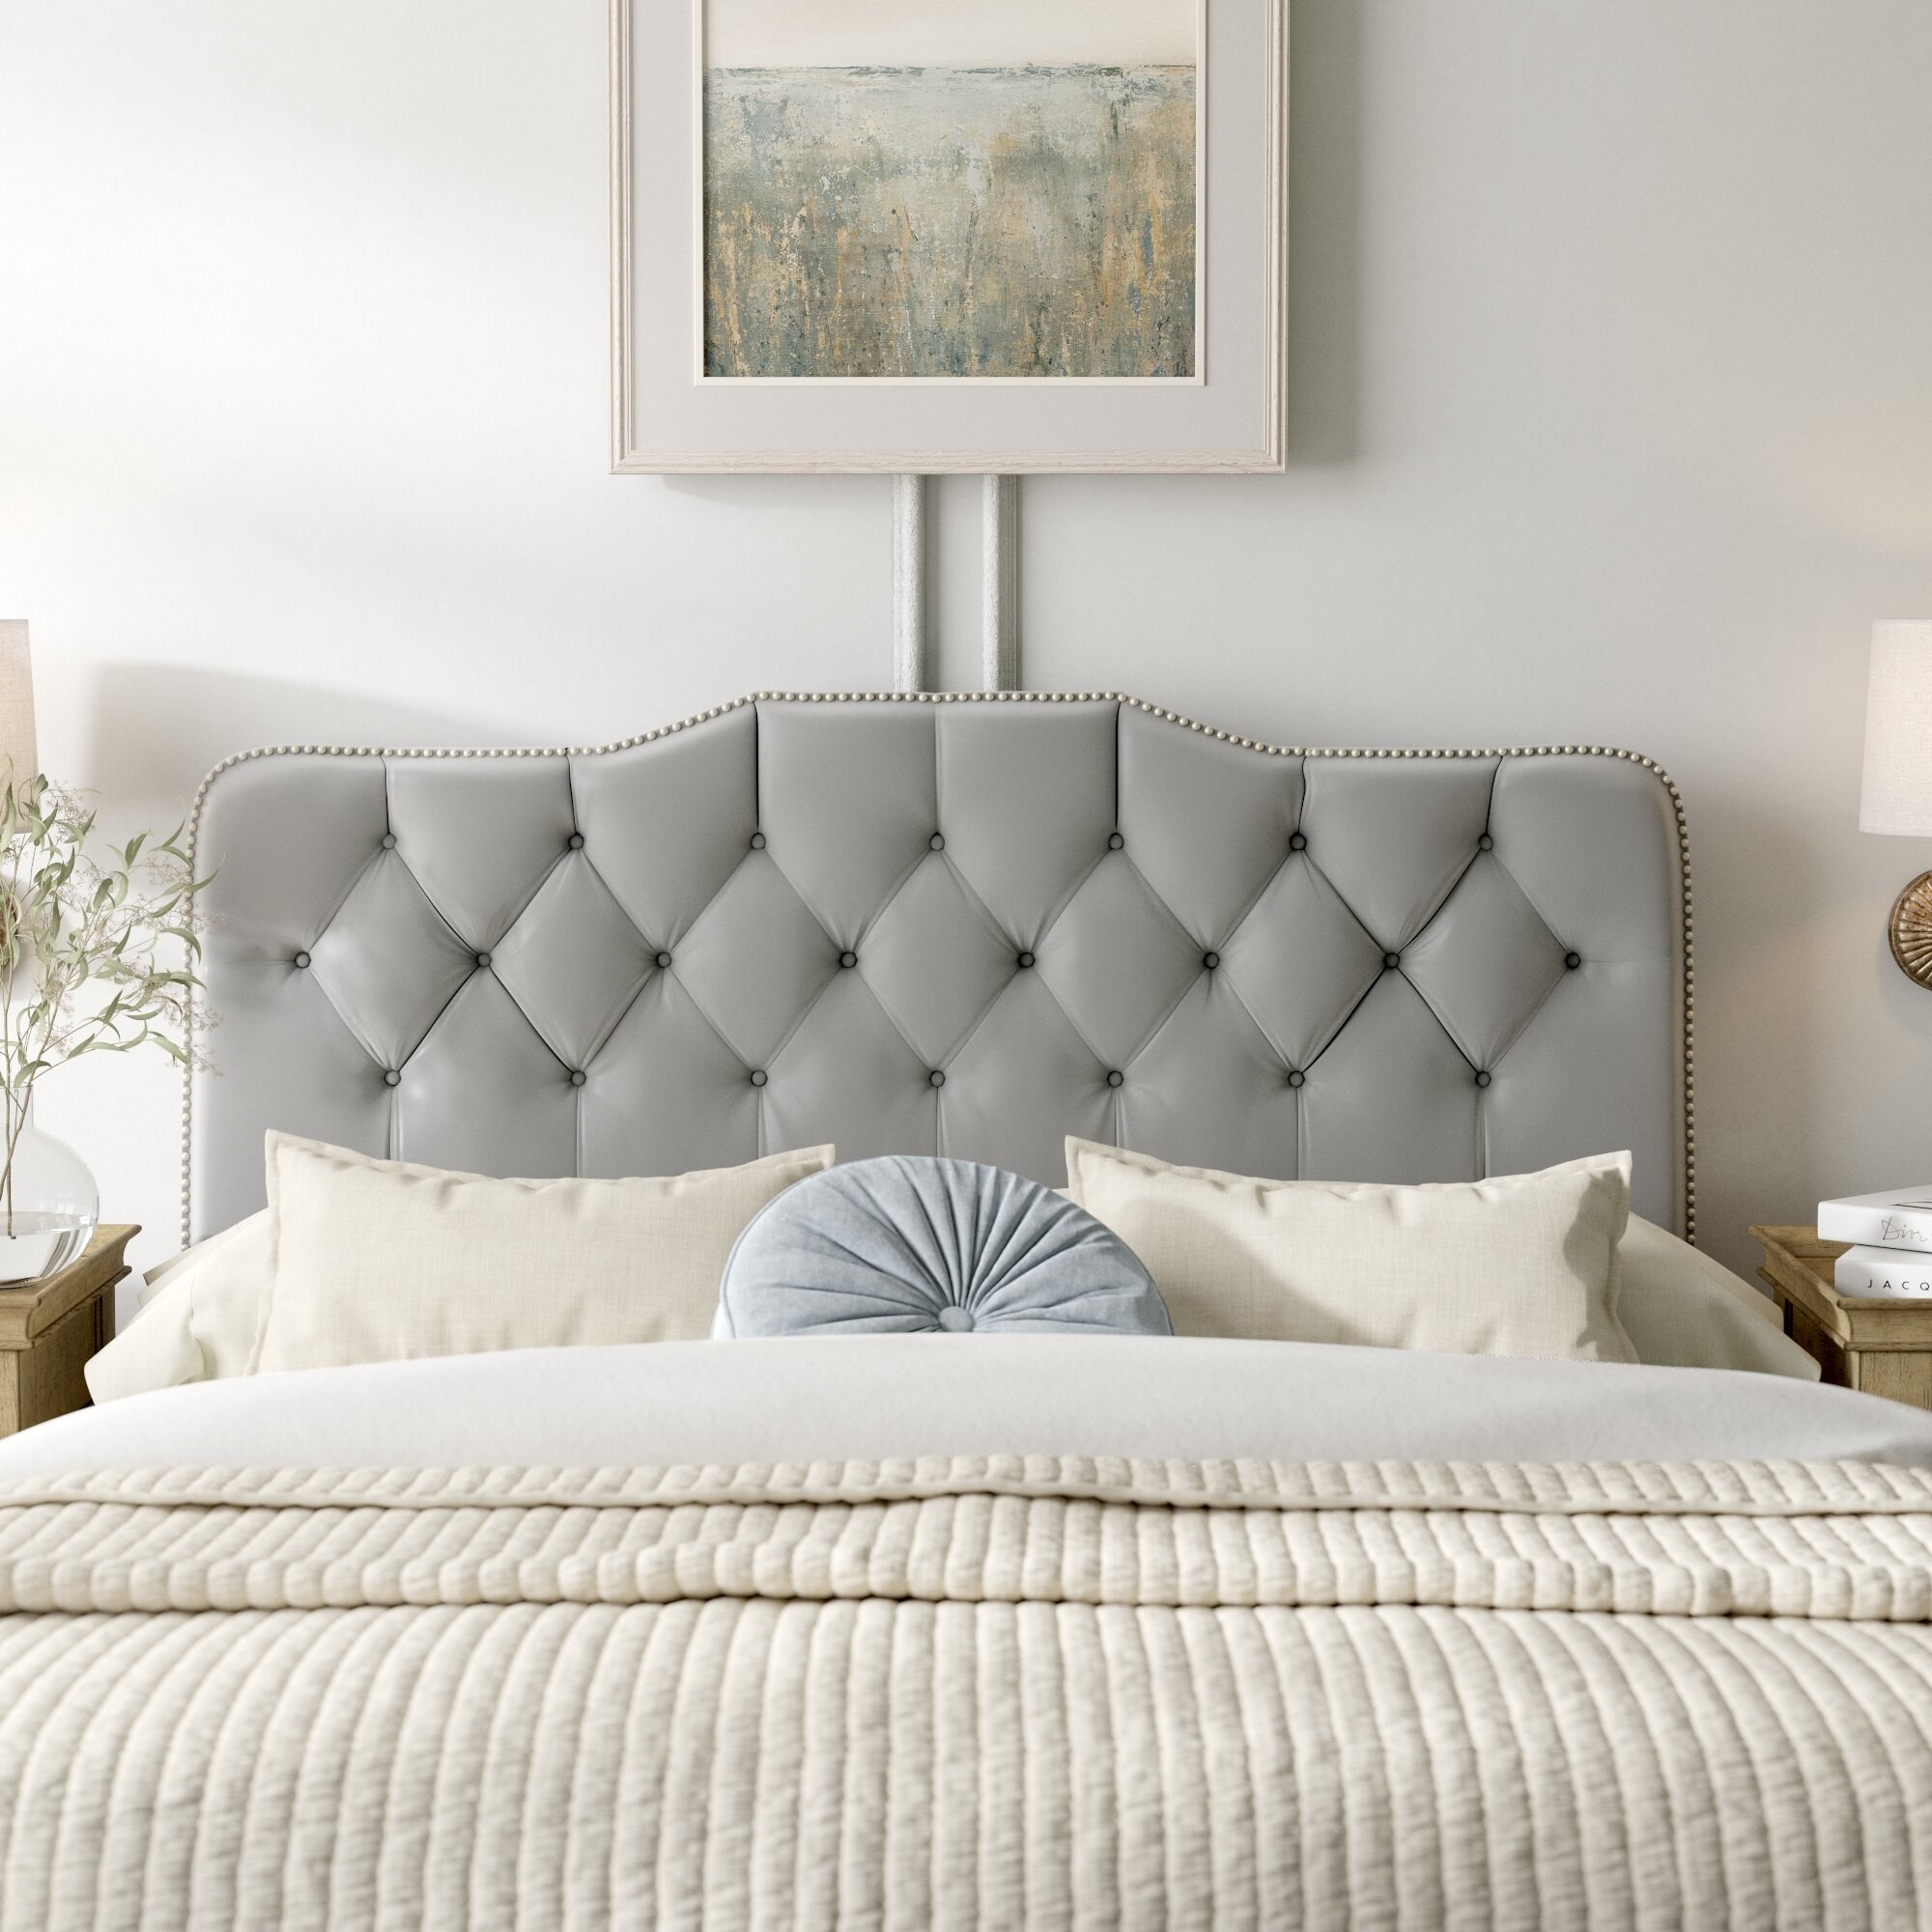 the headboard in gray with white and gray pillows on it and white bedding